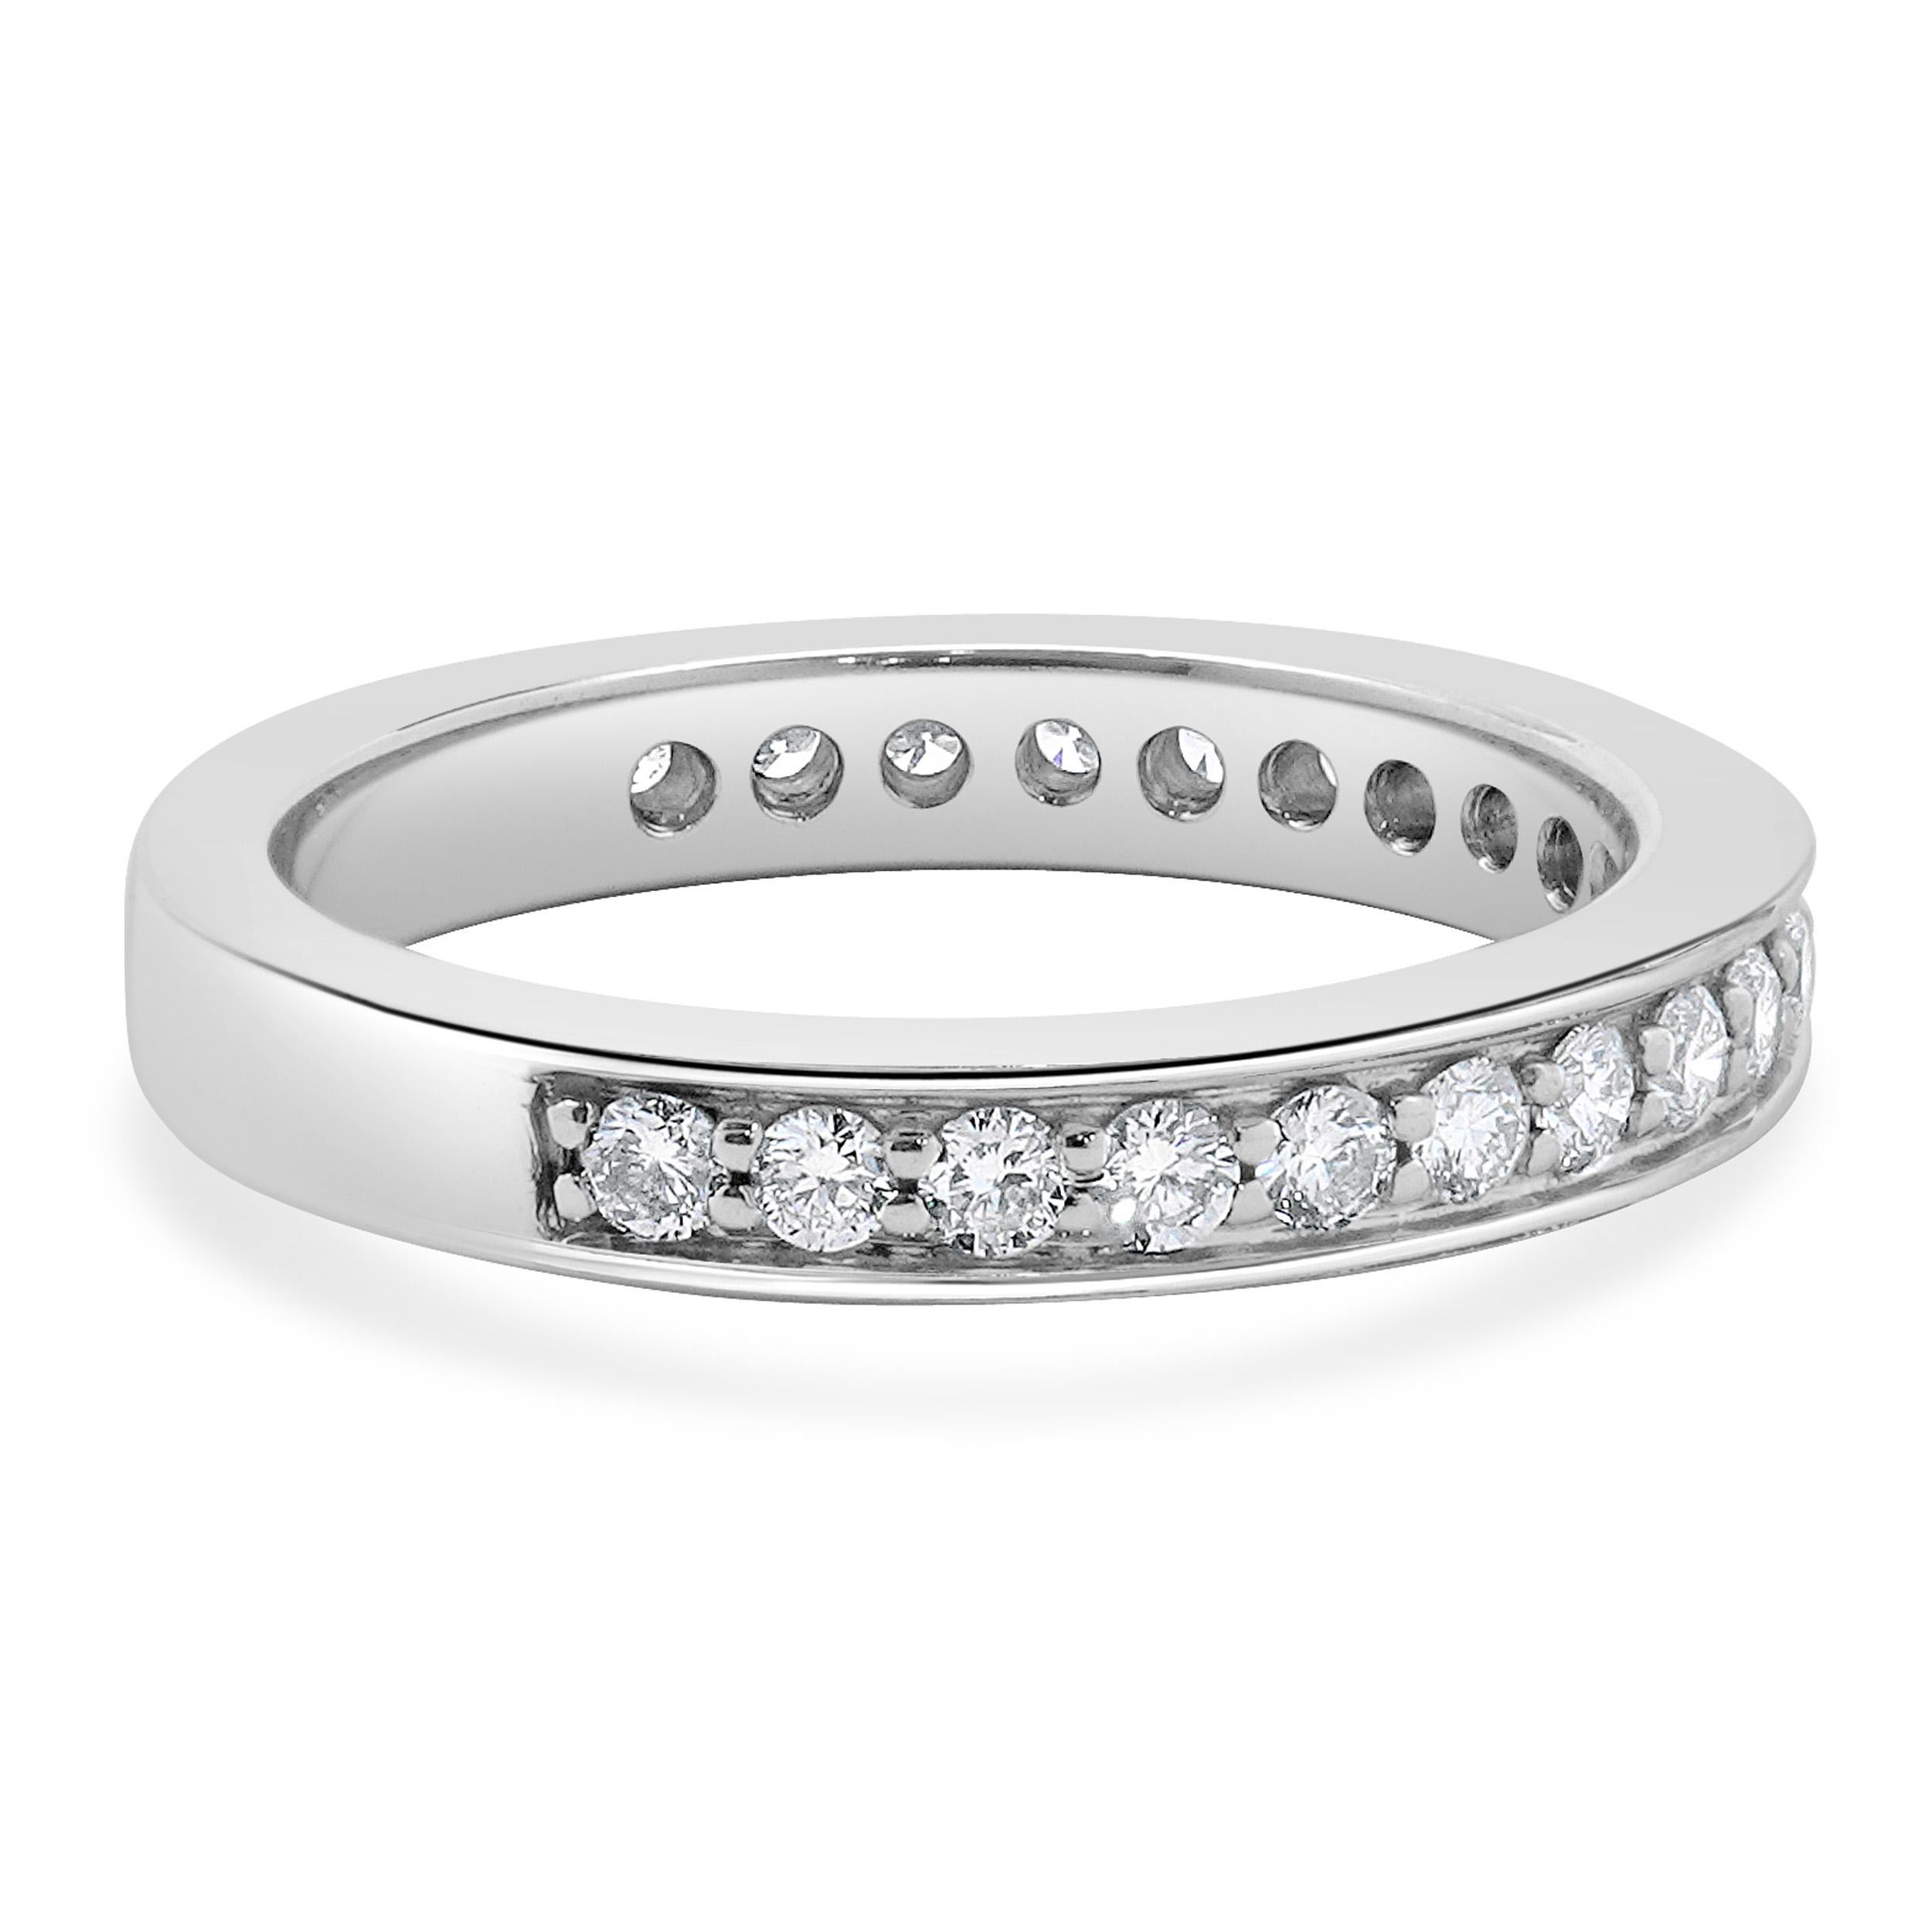 14 Karat White Gold Channel Set Diamond Eternity Band In Excellent Condition For Sale In Scottsdale, AZ